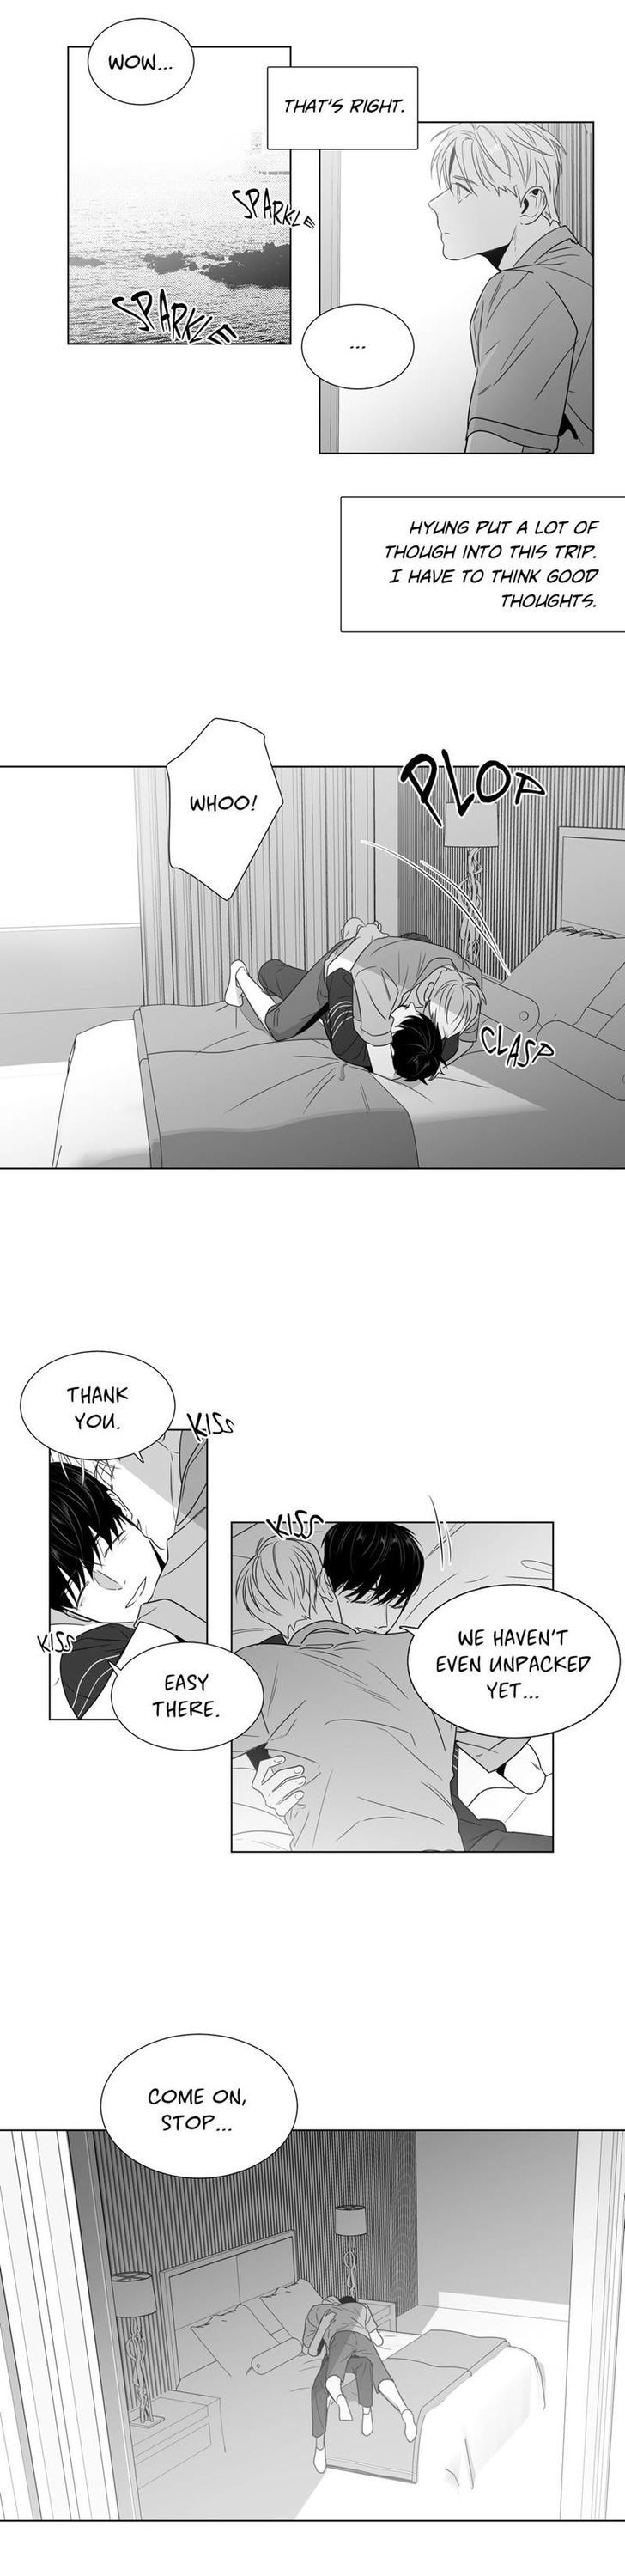 Lover Boy (Lezhin) Chapter 043 page 11